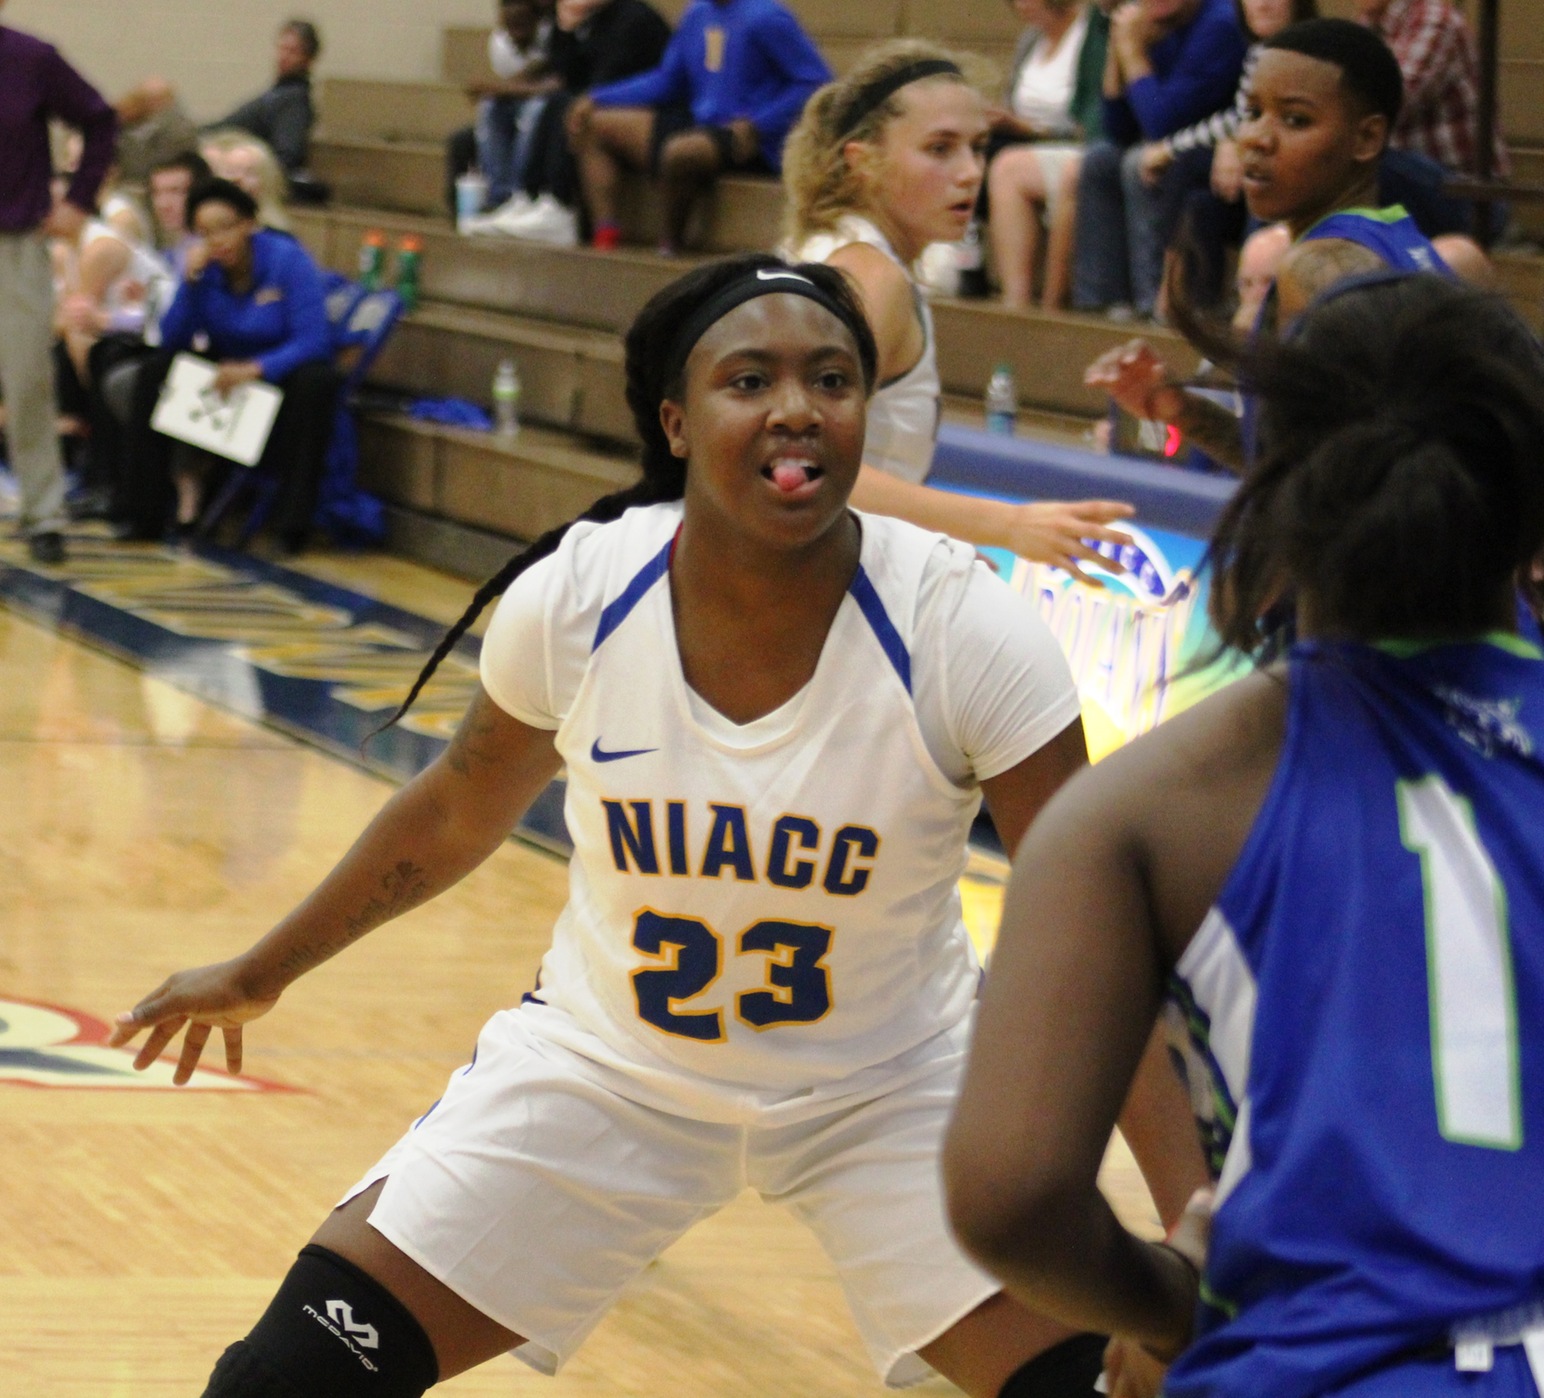 NIACC's Cierra Stanciel ranks fourth in the ICCAC in steals with 32.